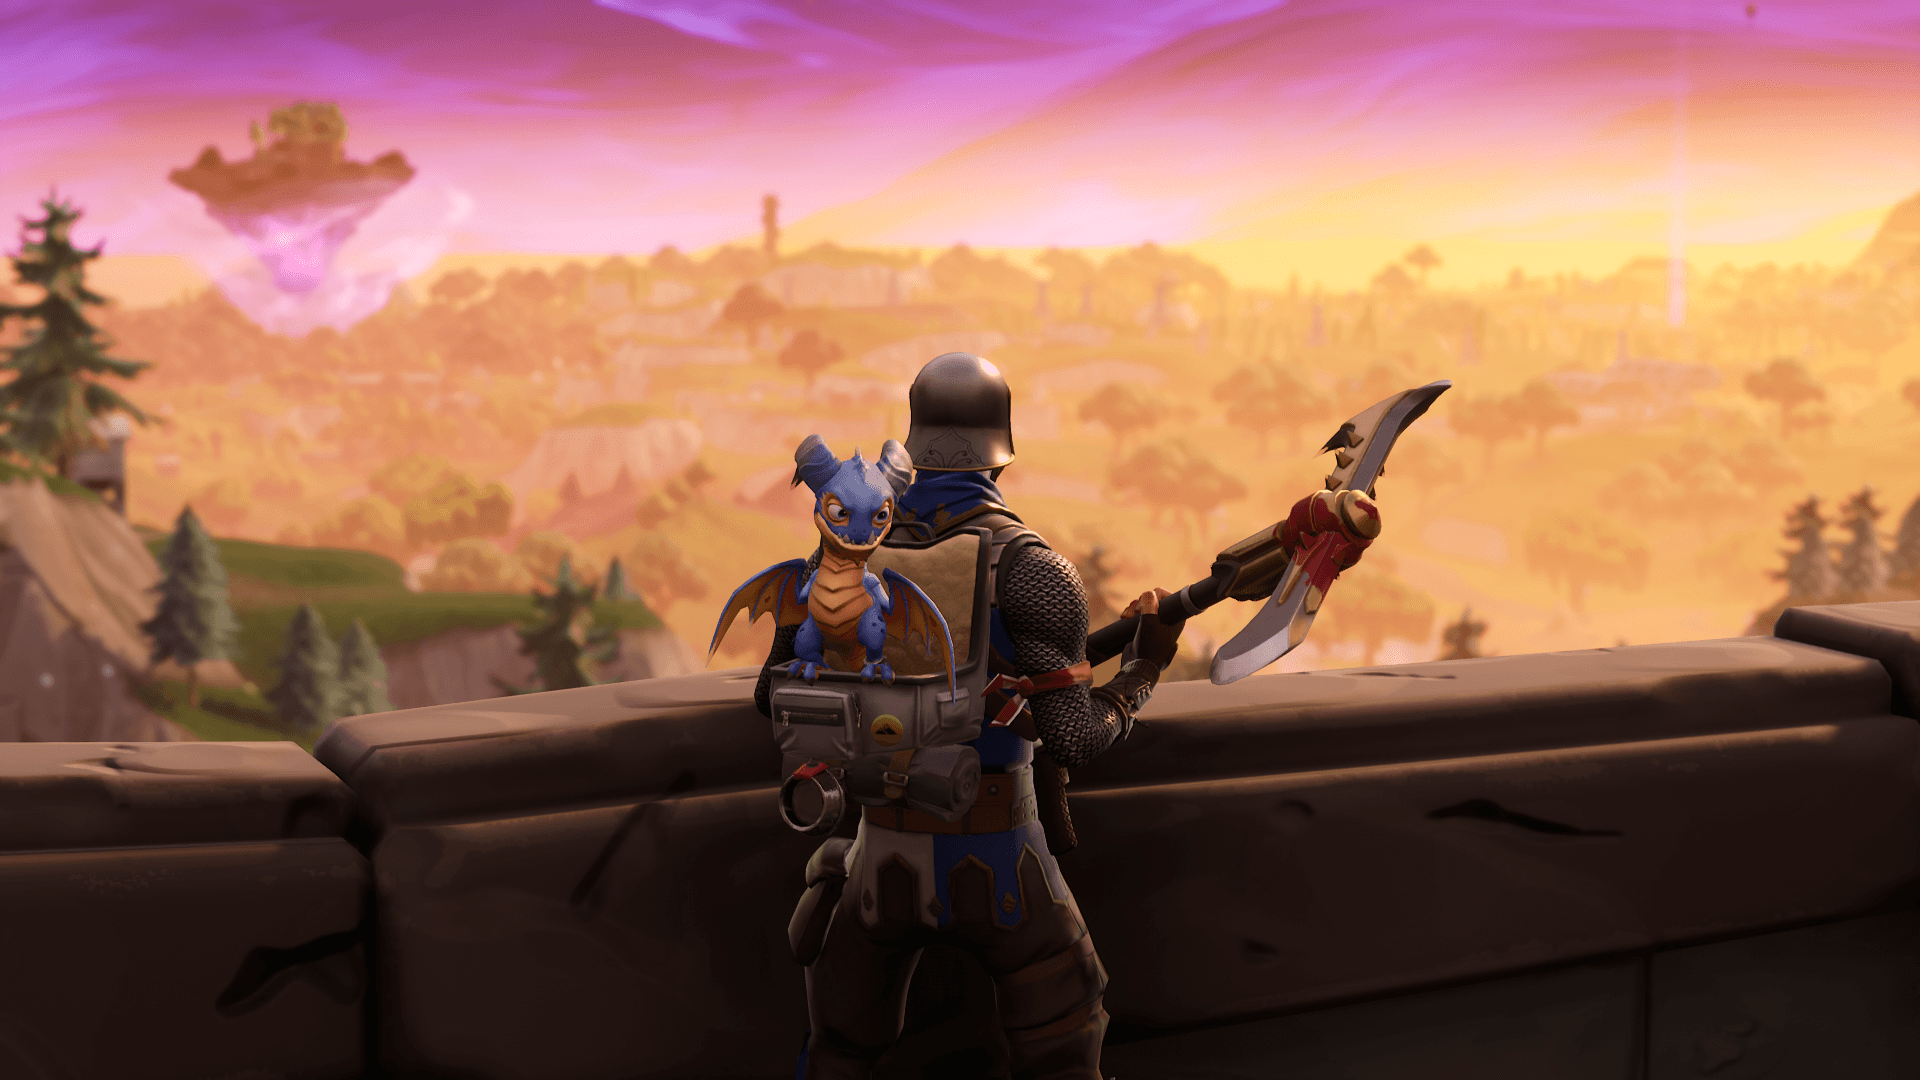 Blue squire and his trusty pet dragon